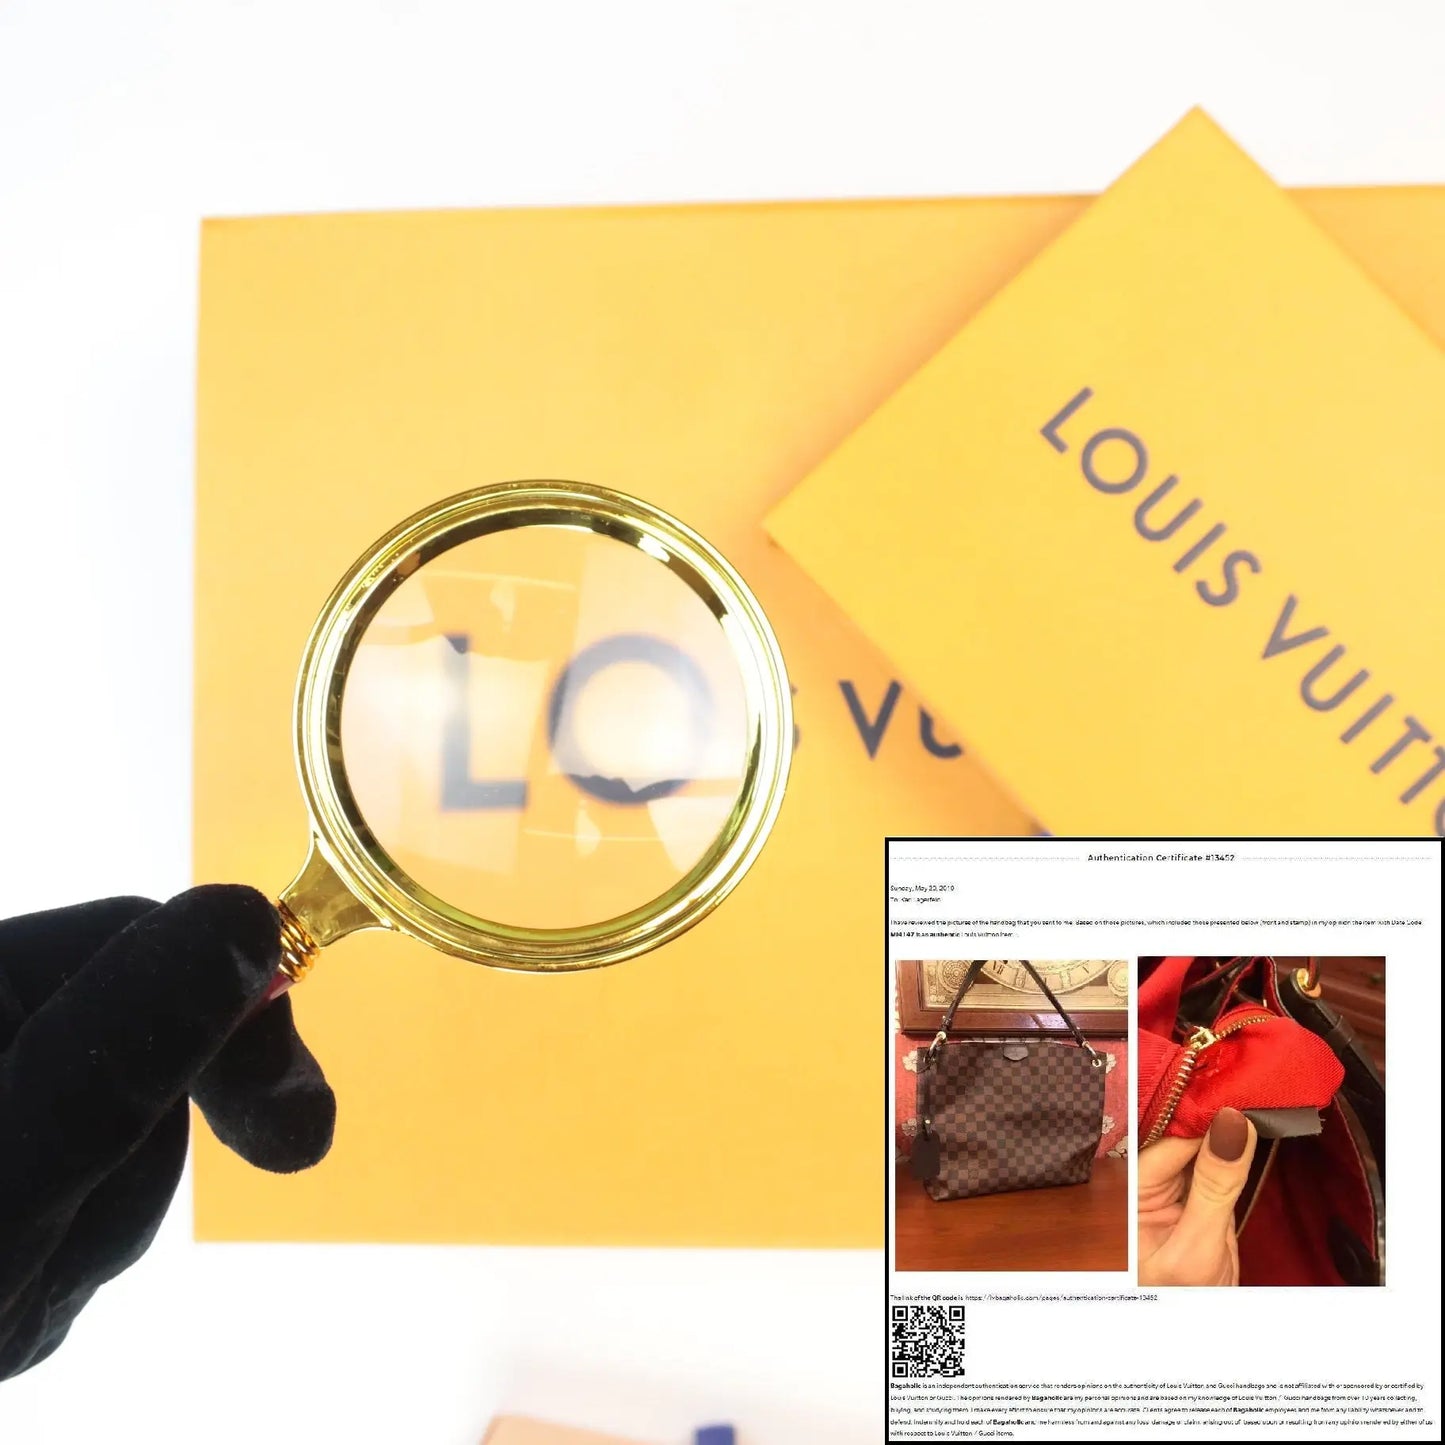 Authentication please, i googled and its called louis vuitton